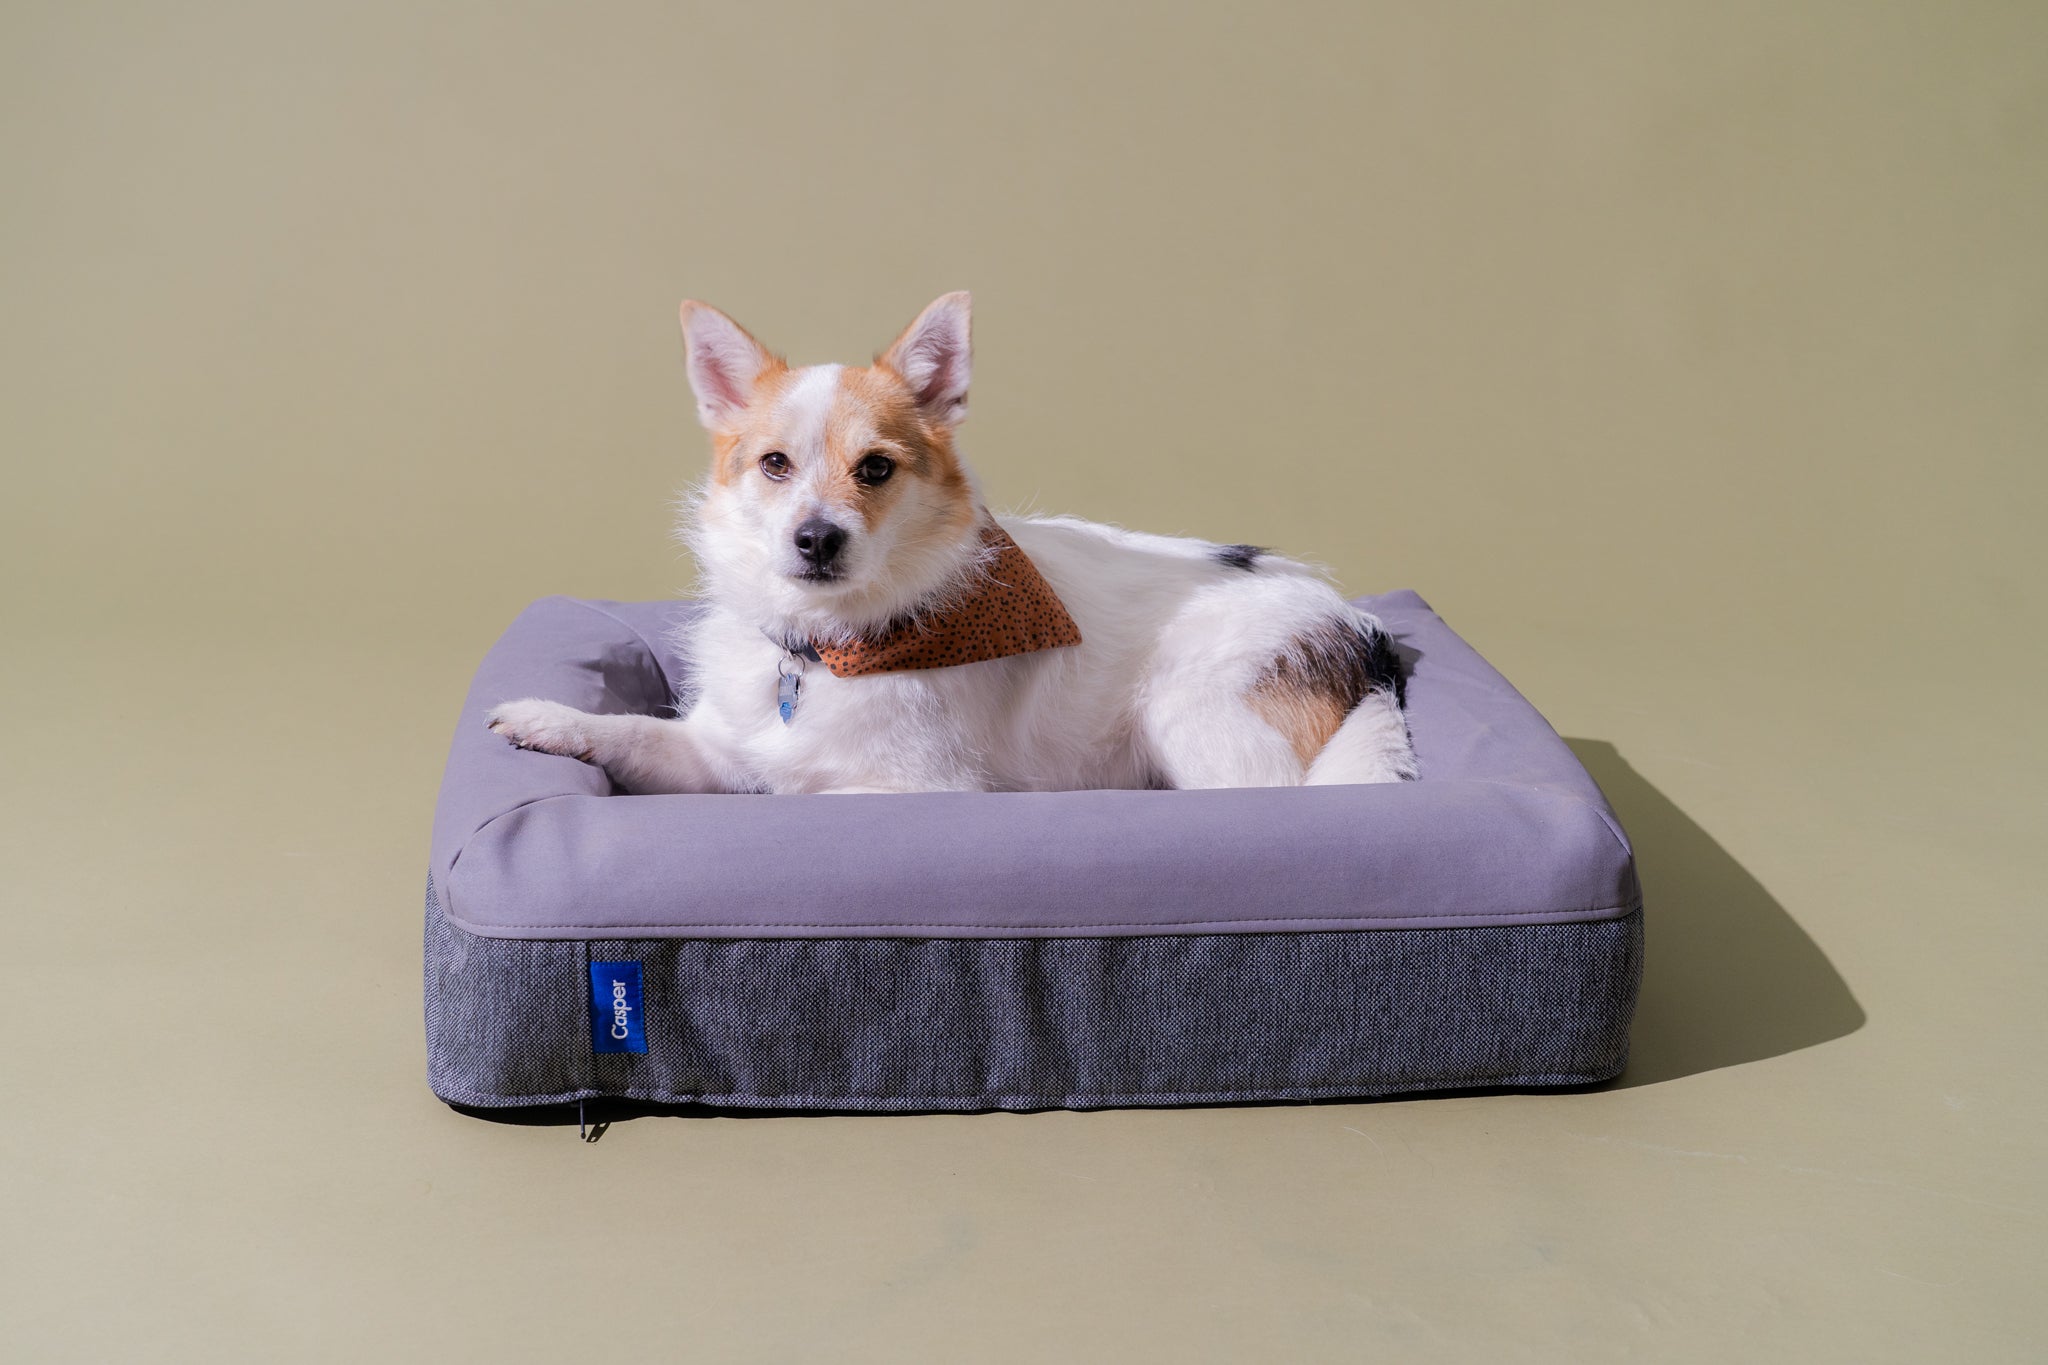 Best Dog Bedding 5 Top Rated and Affordable Options 7278